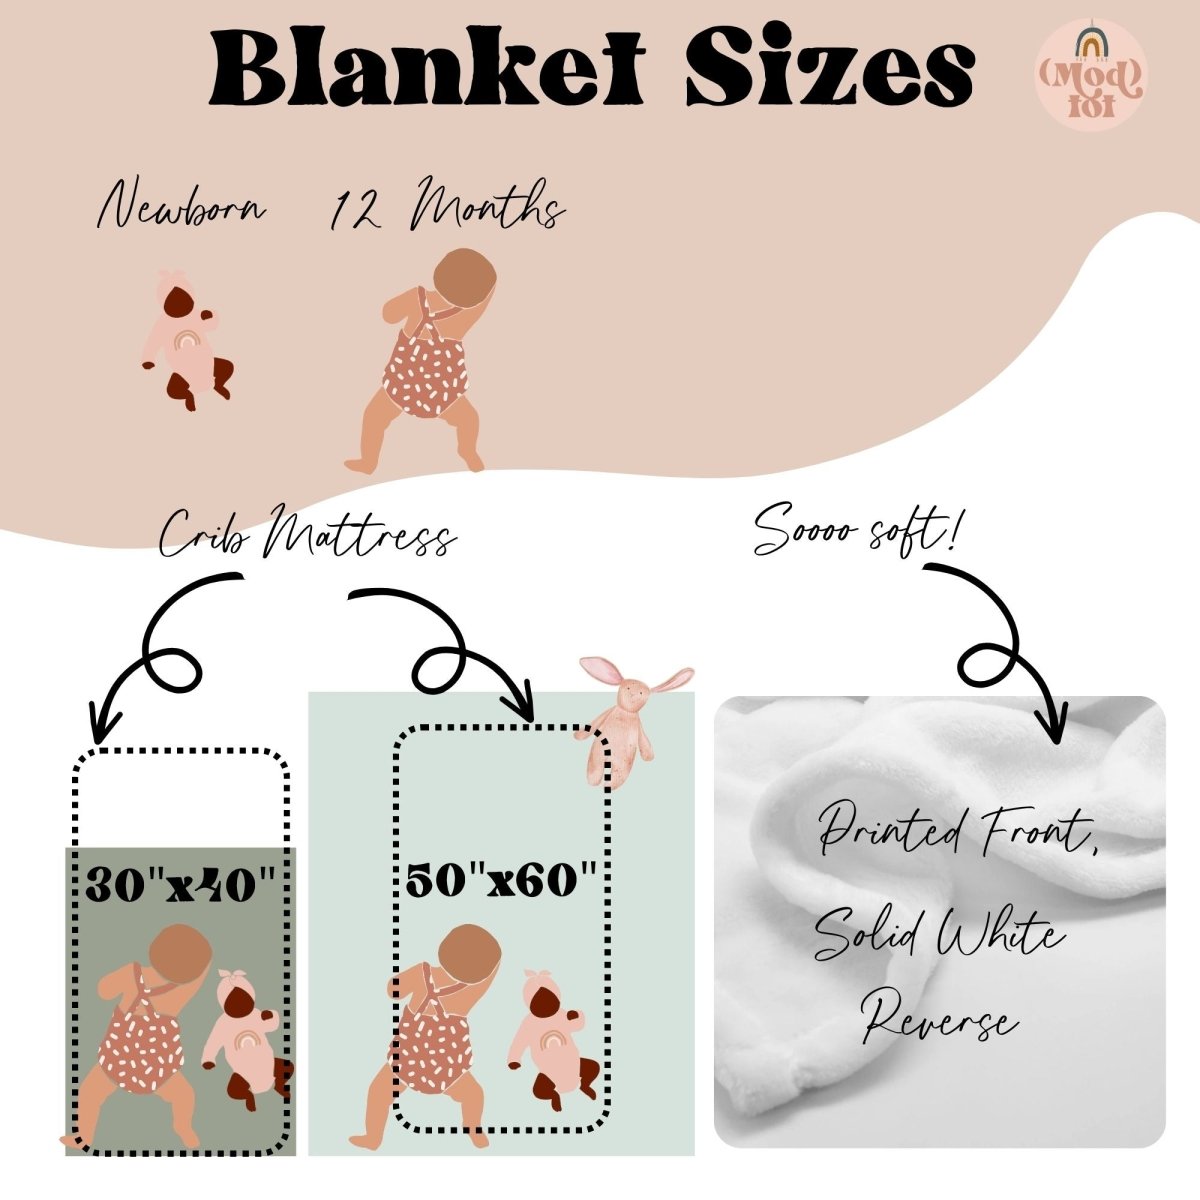 Woodland Friends Personalized Minky Blanket - gender_boy, Personalized_Yes, text